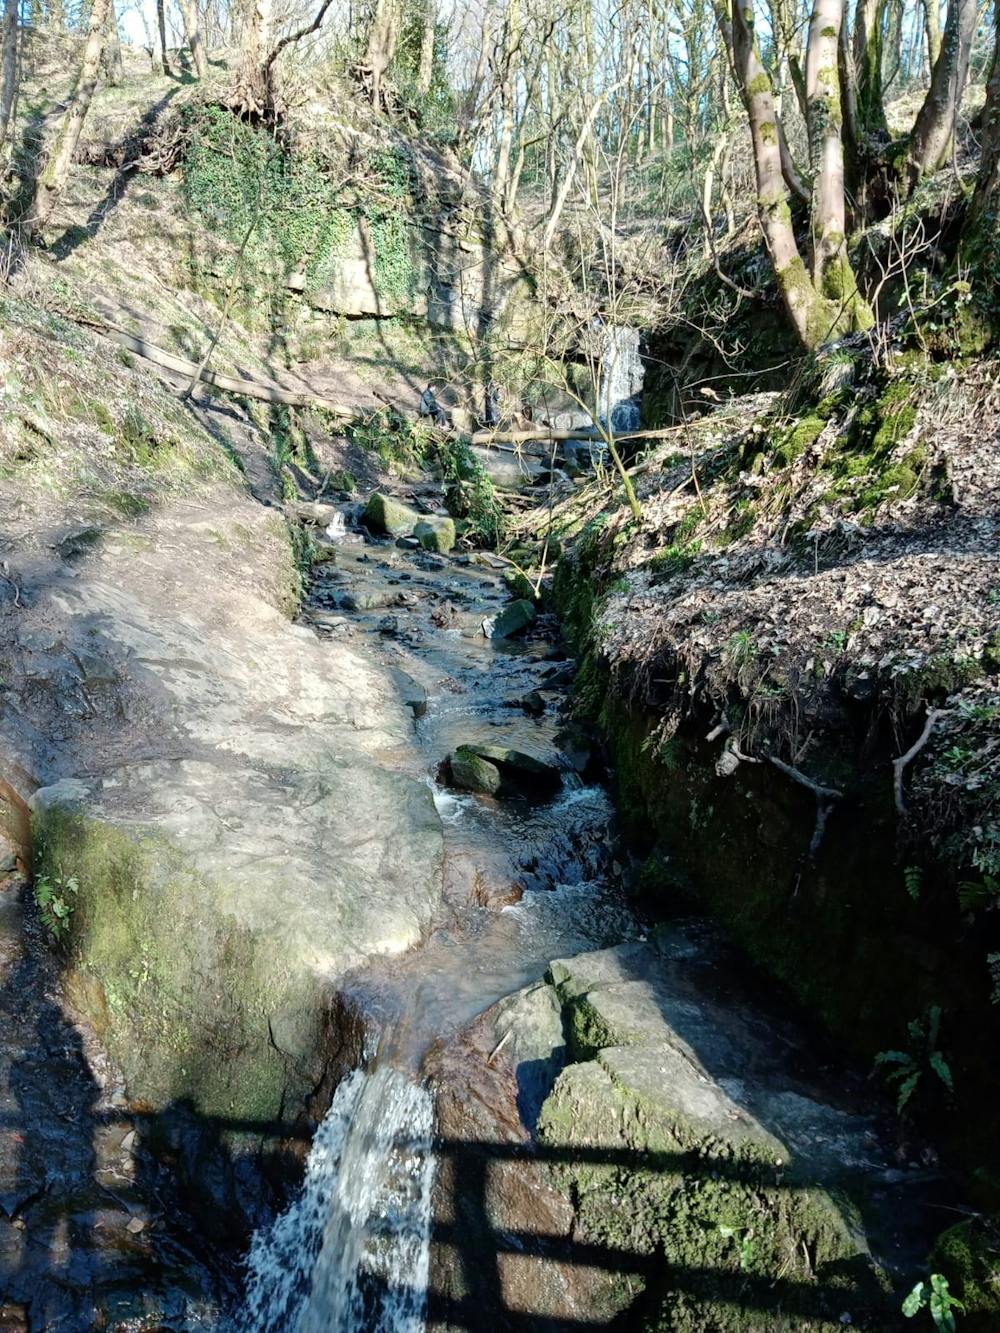 Looking up the brook from the lower part of the Glen